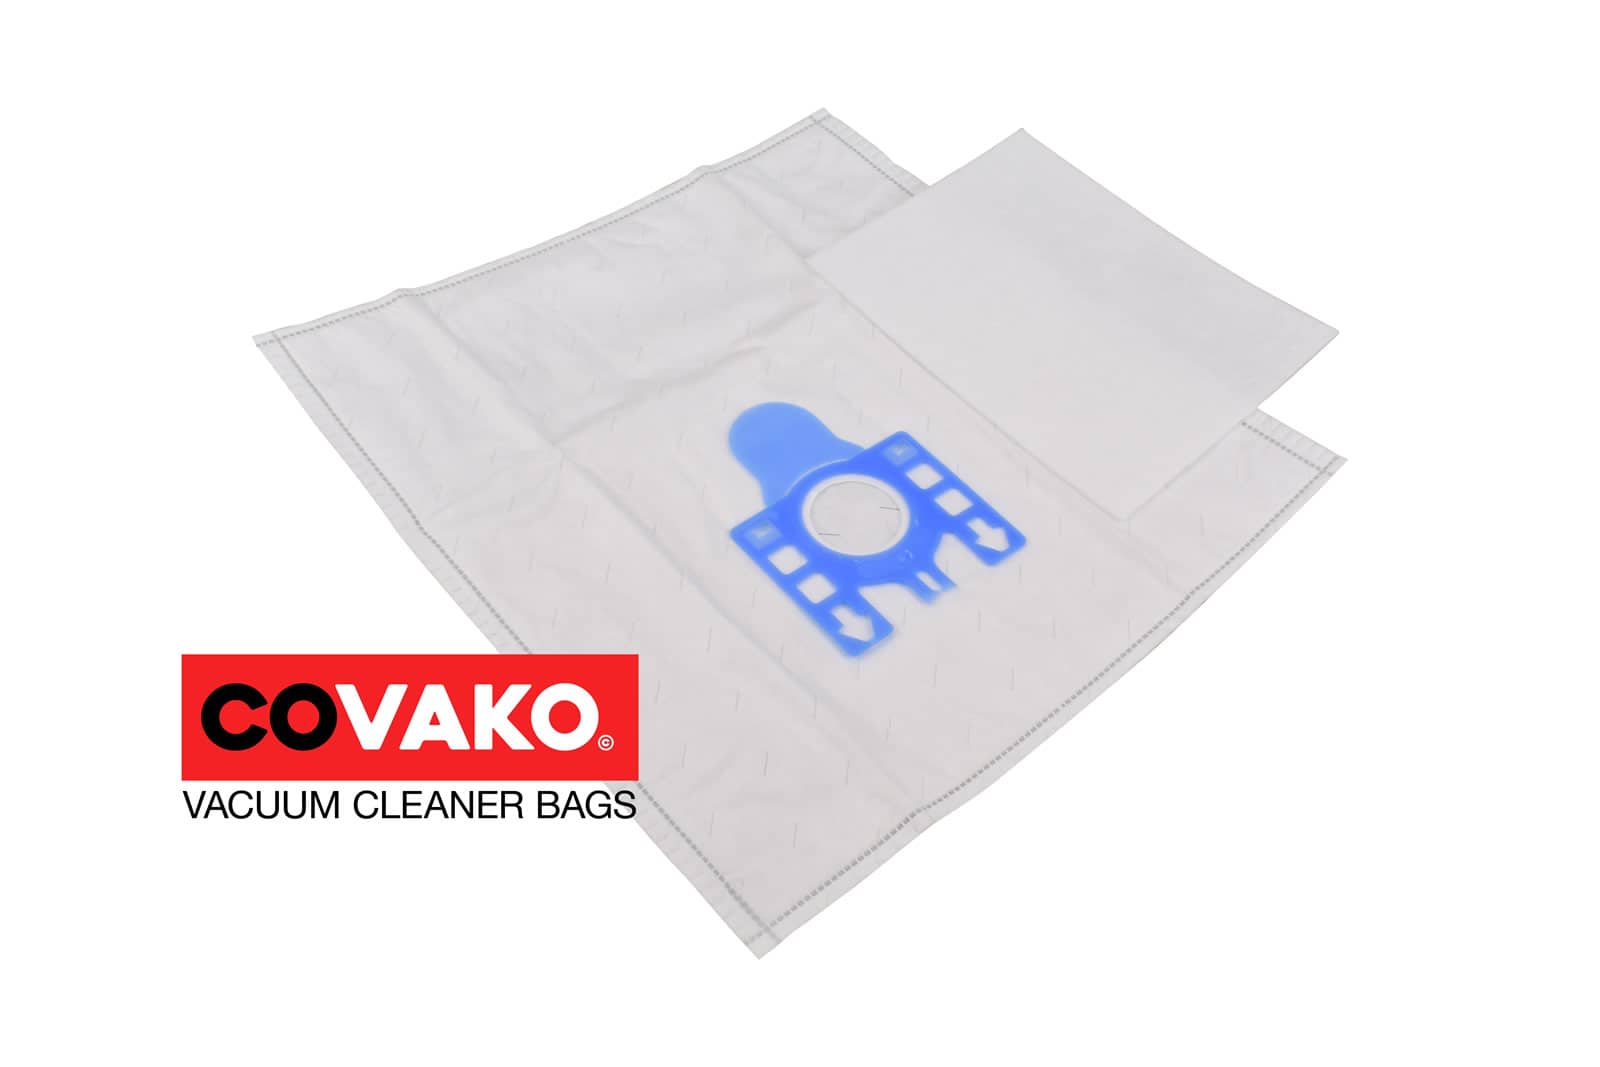 Electrolux CE Mr. Big / Synthesis - Electrolux vacuum cleaner bags